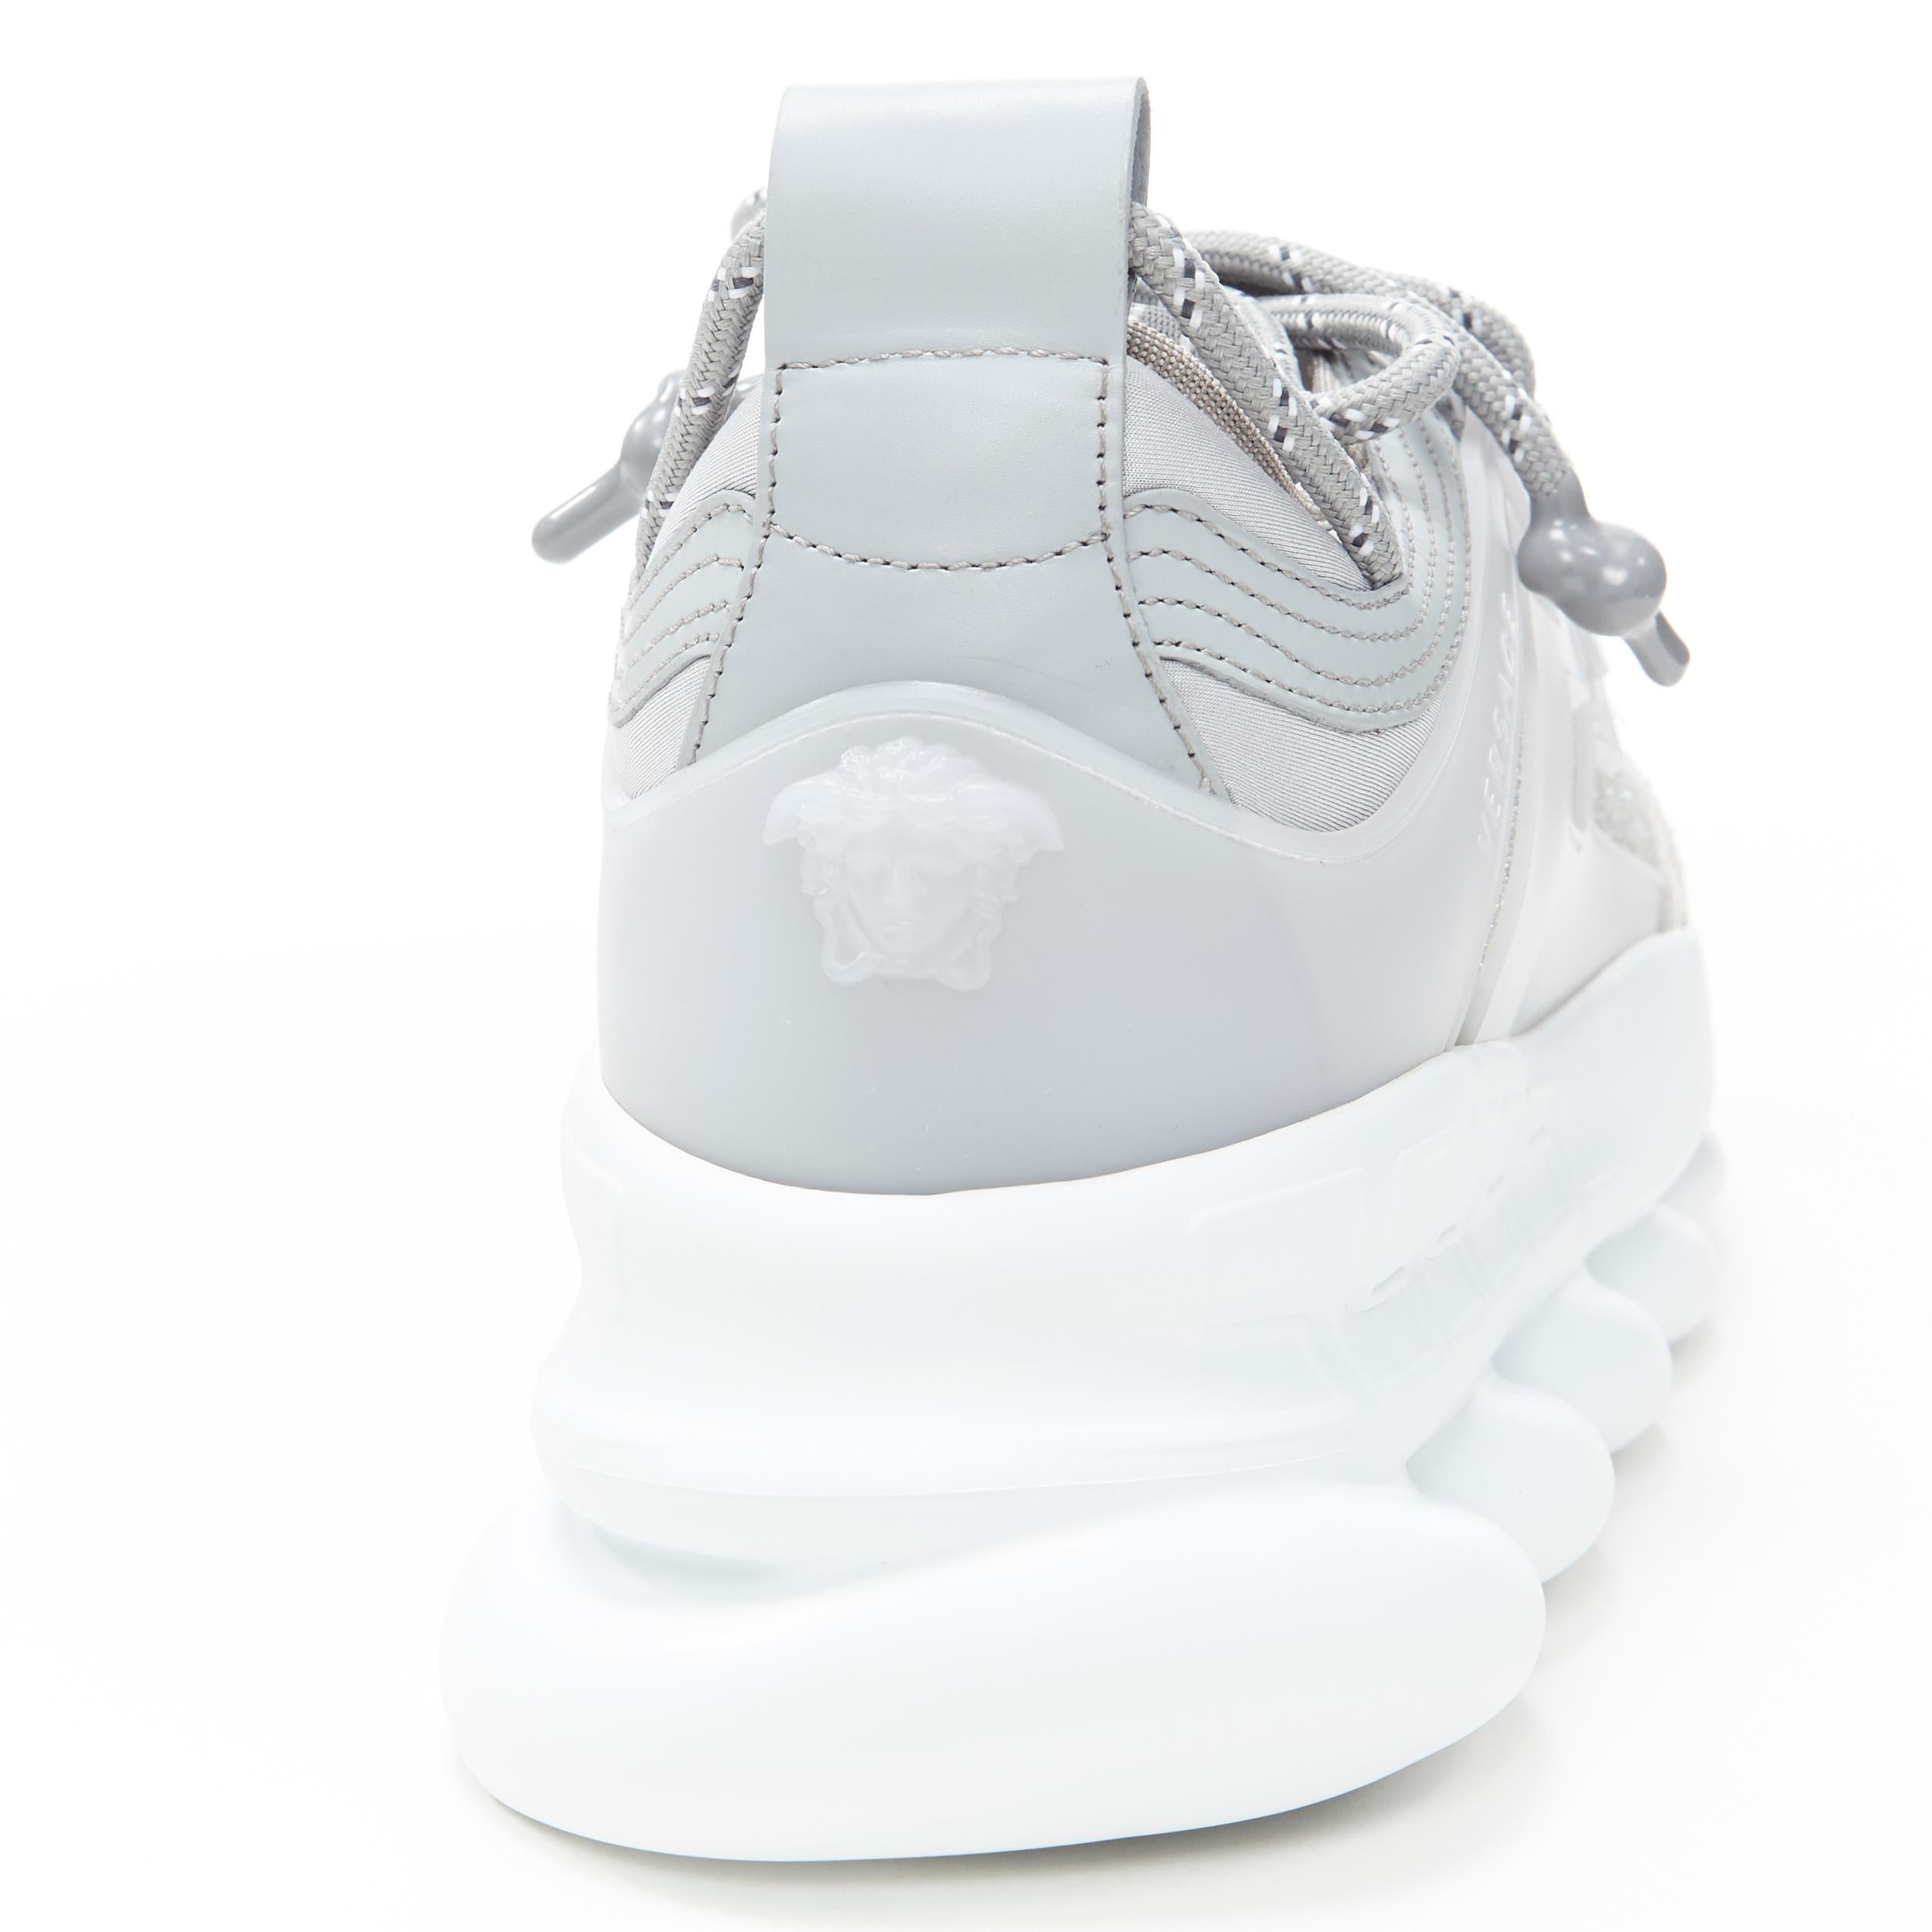 new VERSACE Chain Reaction Reflective Silver Crystal Rhinestone sneaker EU40 US7 For Sale 3